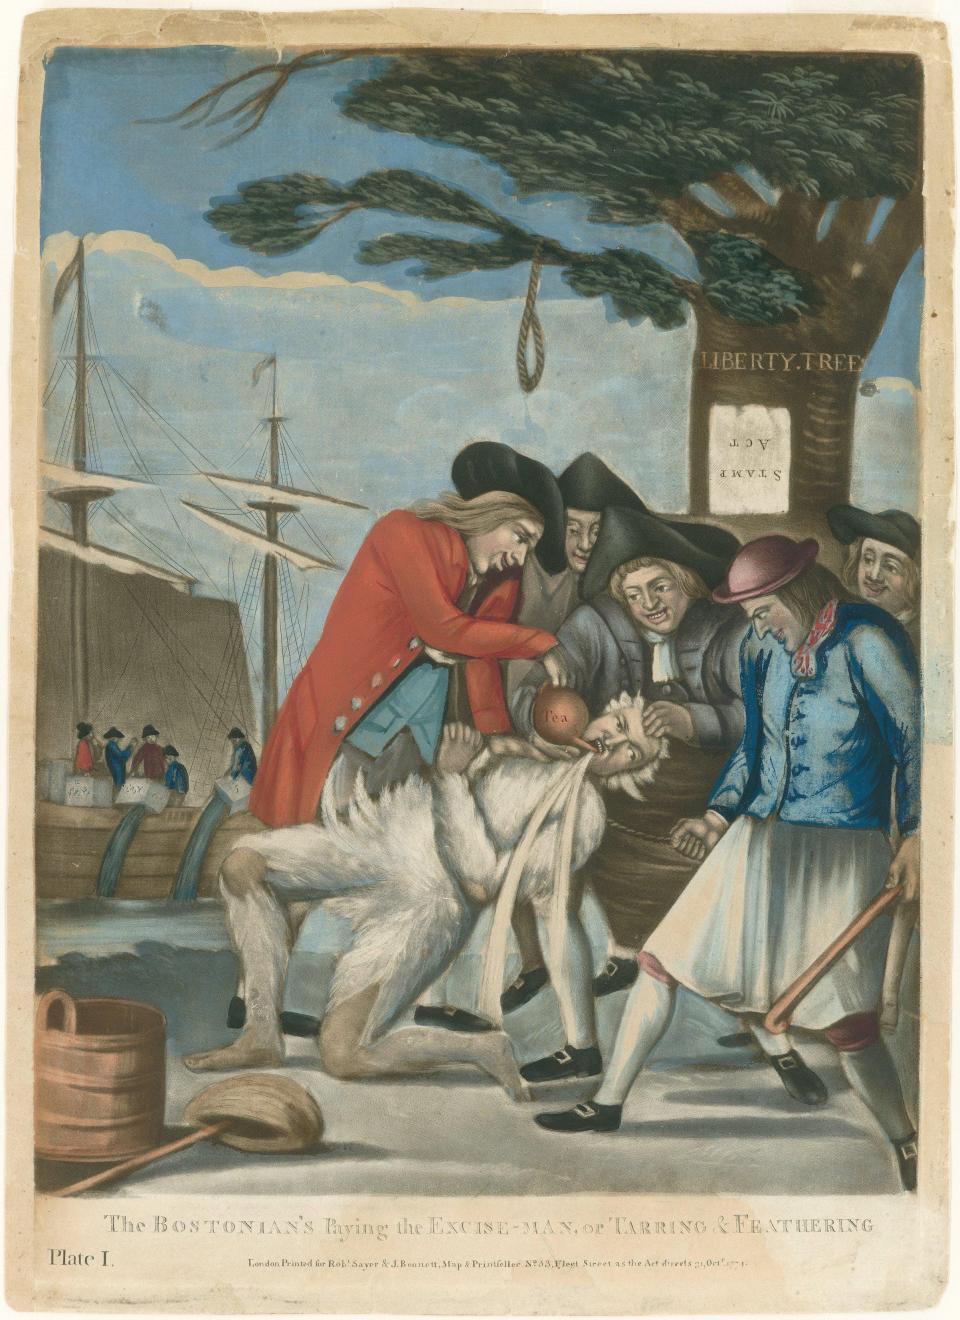 The secret society of American patriots called "Sons of Liberty" who advocated revolution were seen by Loyalists as thuggish, lawless, and violent. This 1774 British illustration depicts Bostonians tarring and feathering a Loyalist tax collector and pouring tea down his throat.